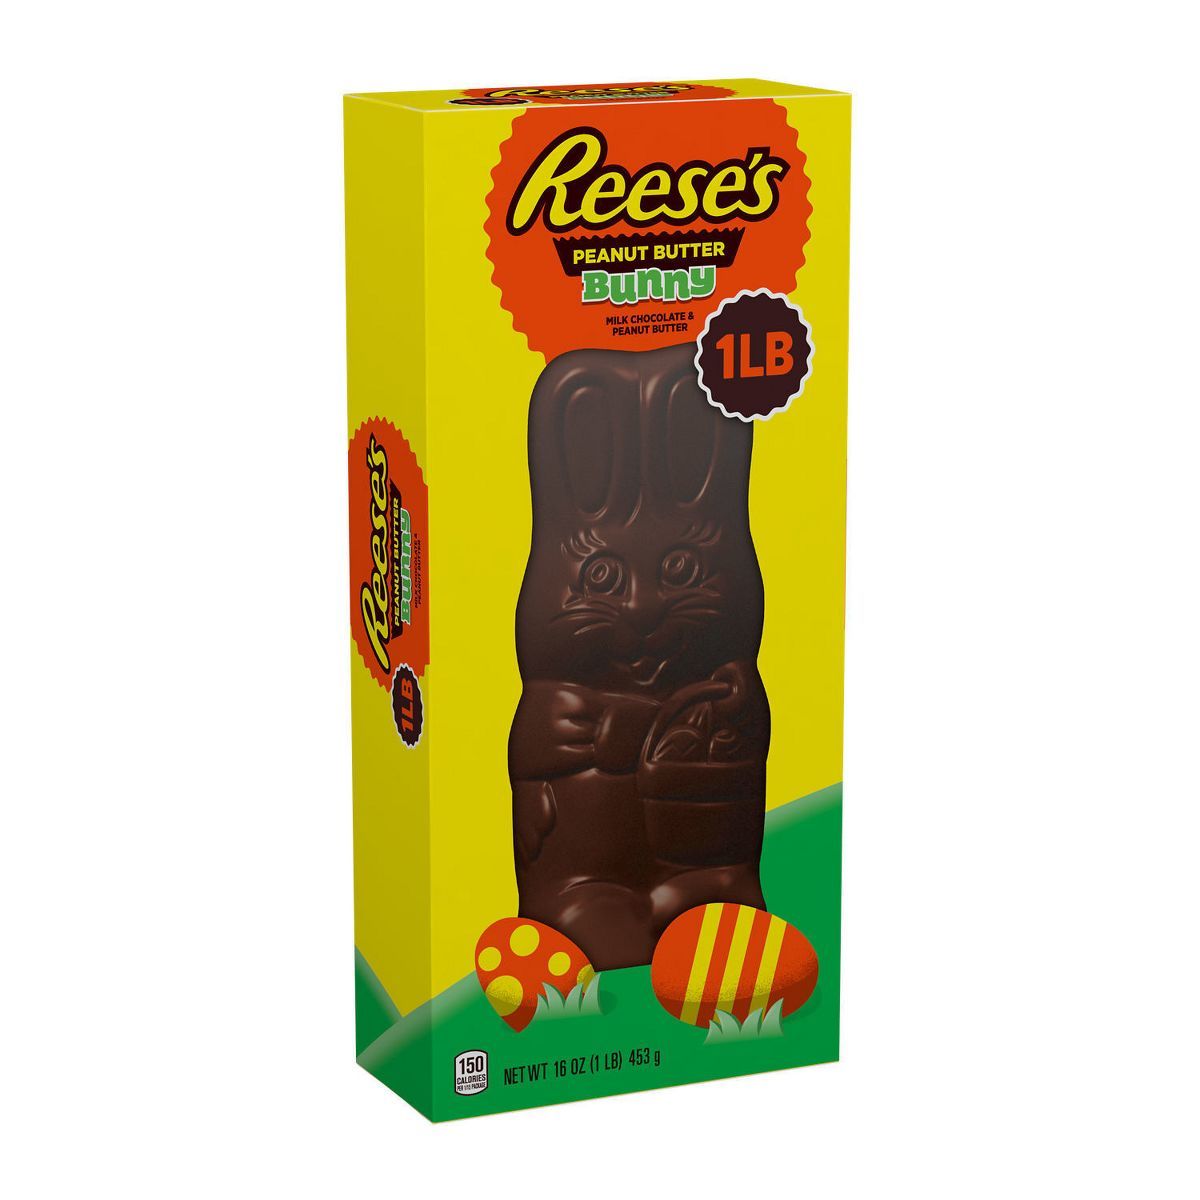 Reese's Milk Chocolate Peanut Butter Bunny Easter Candy Gift Box - 1lb | Target